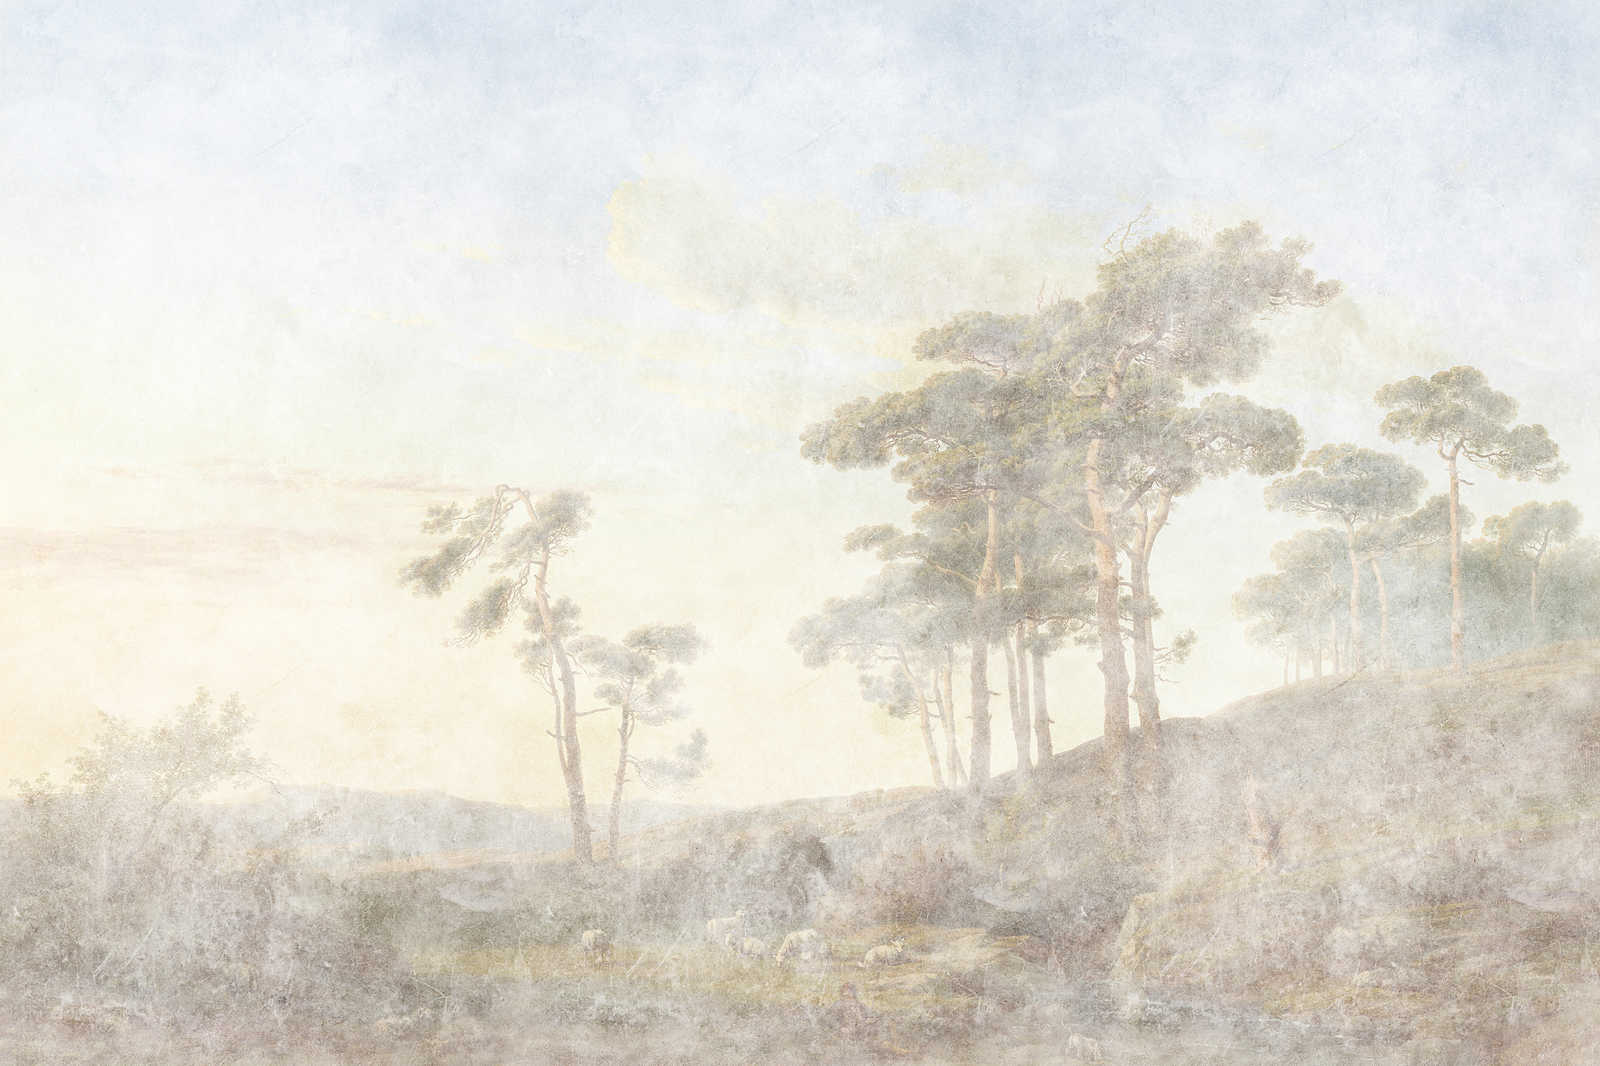             Romantic Grove 1 - Painting Canvas Faded Used Look - 1.20 m x 0.80 m
        